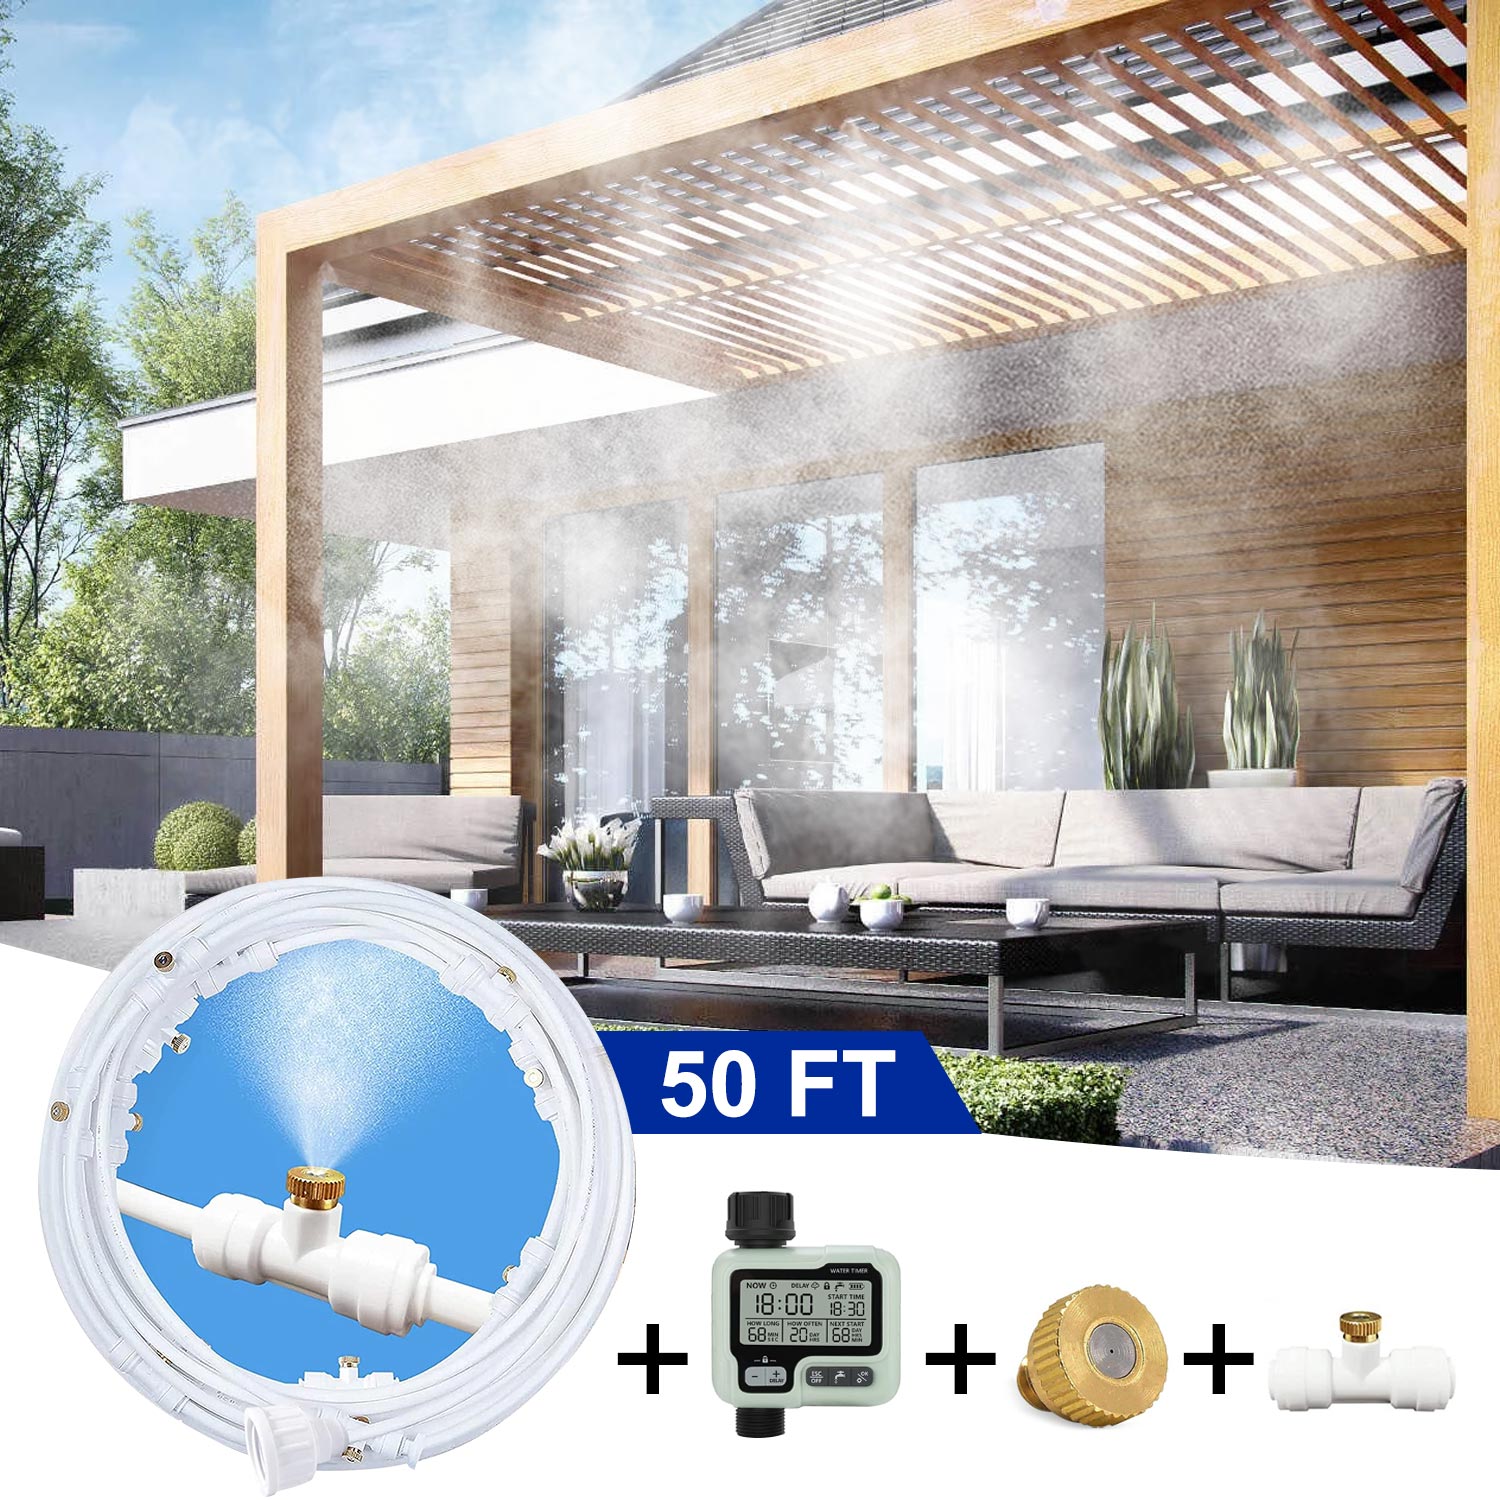 Misters for Outside Patio50FT|15MBackyard Mist +Homemade Kit Accessories